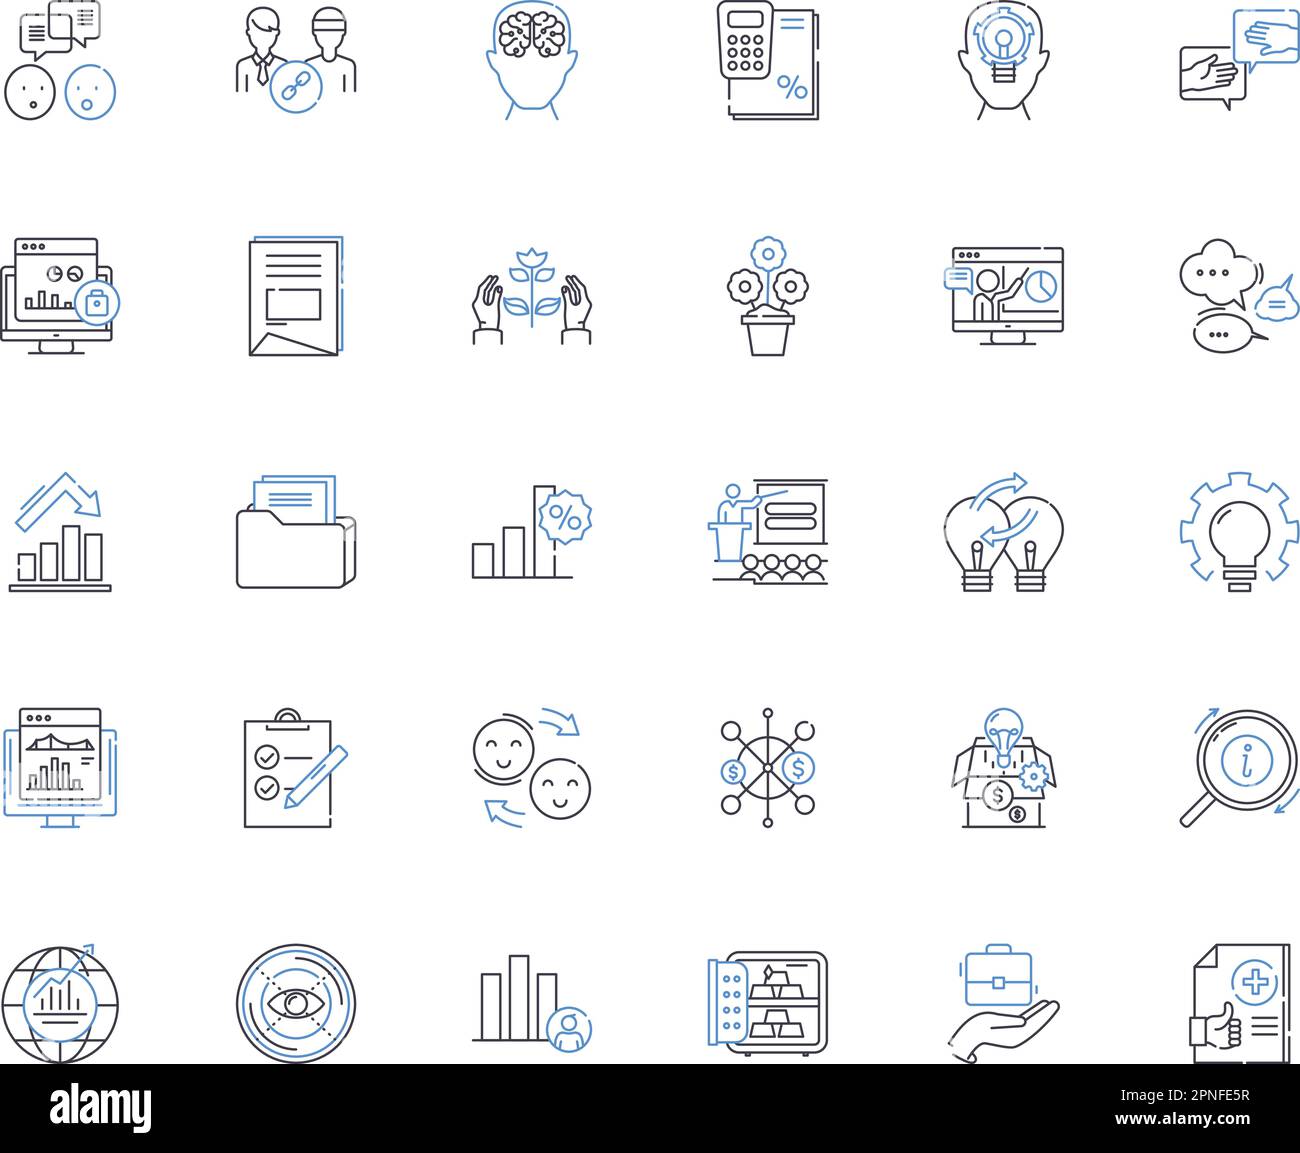 Investment Strategy line icons collection. Diversification, Risk, Portfolio, Growth, Capital, Assets, Returns vector and linear illustration. Stocks Stock Vector